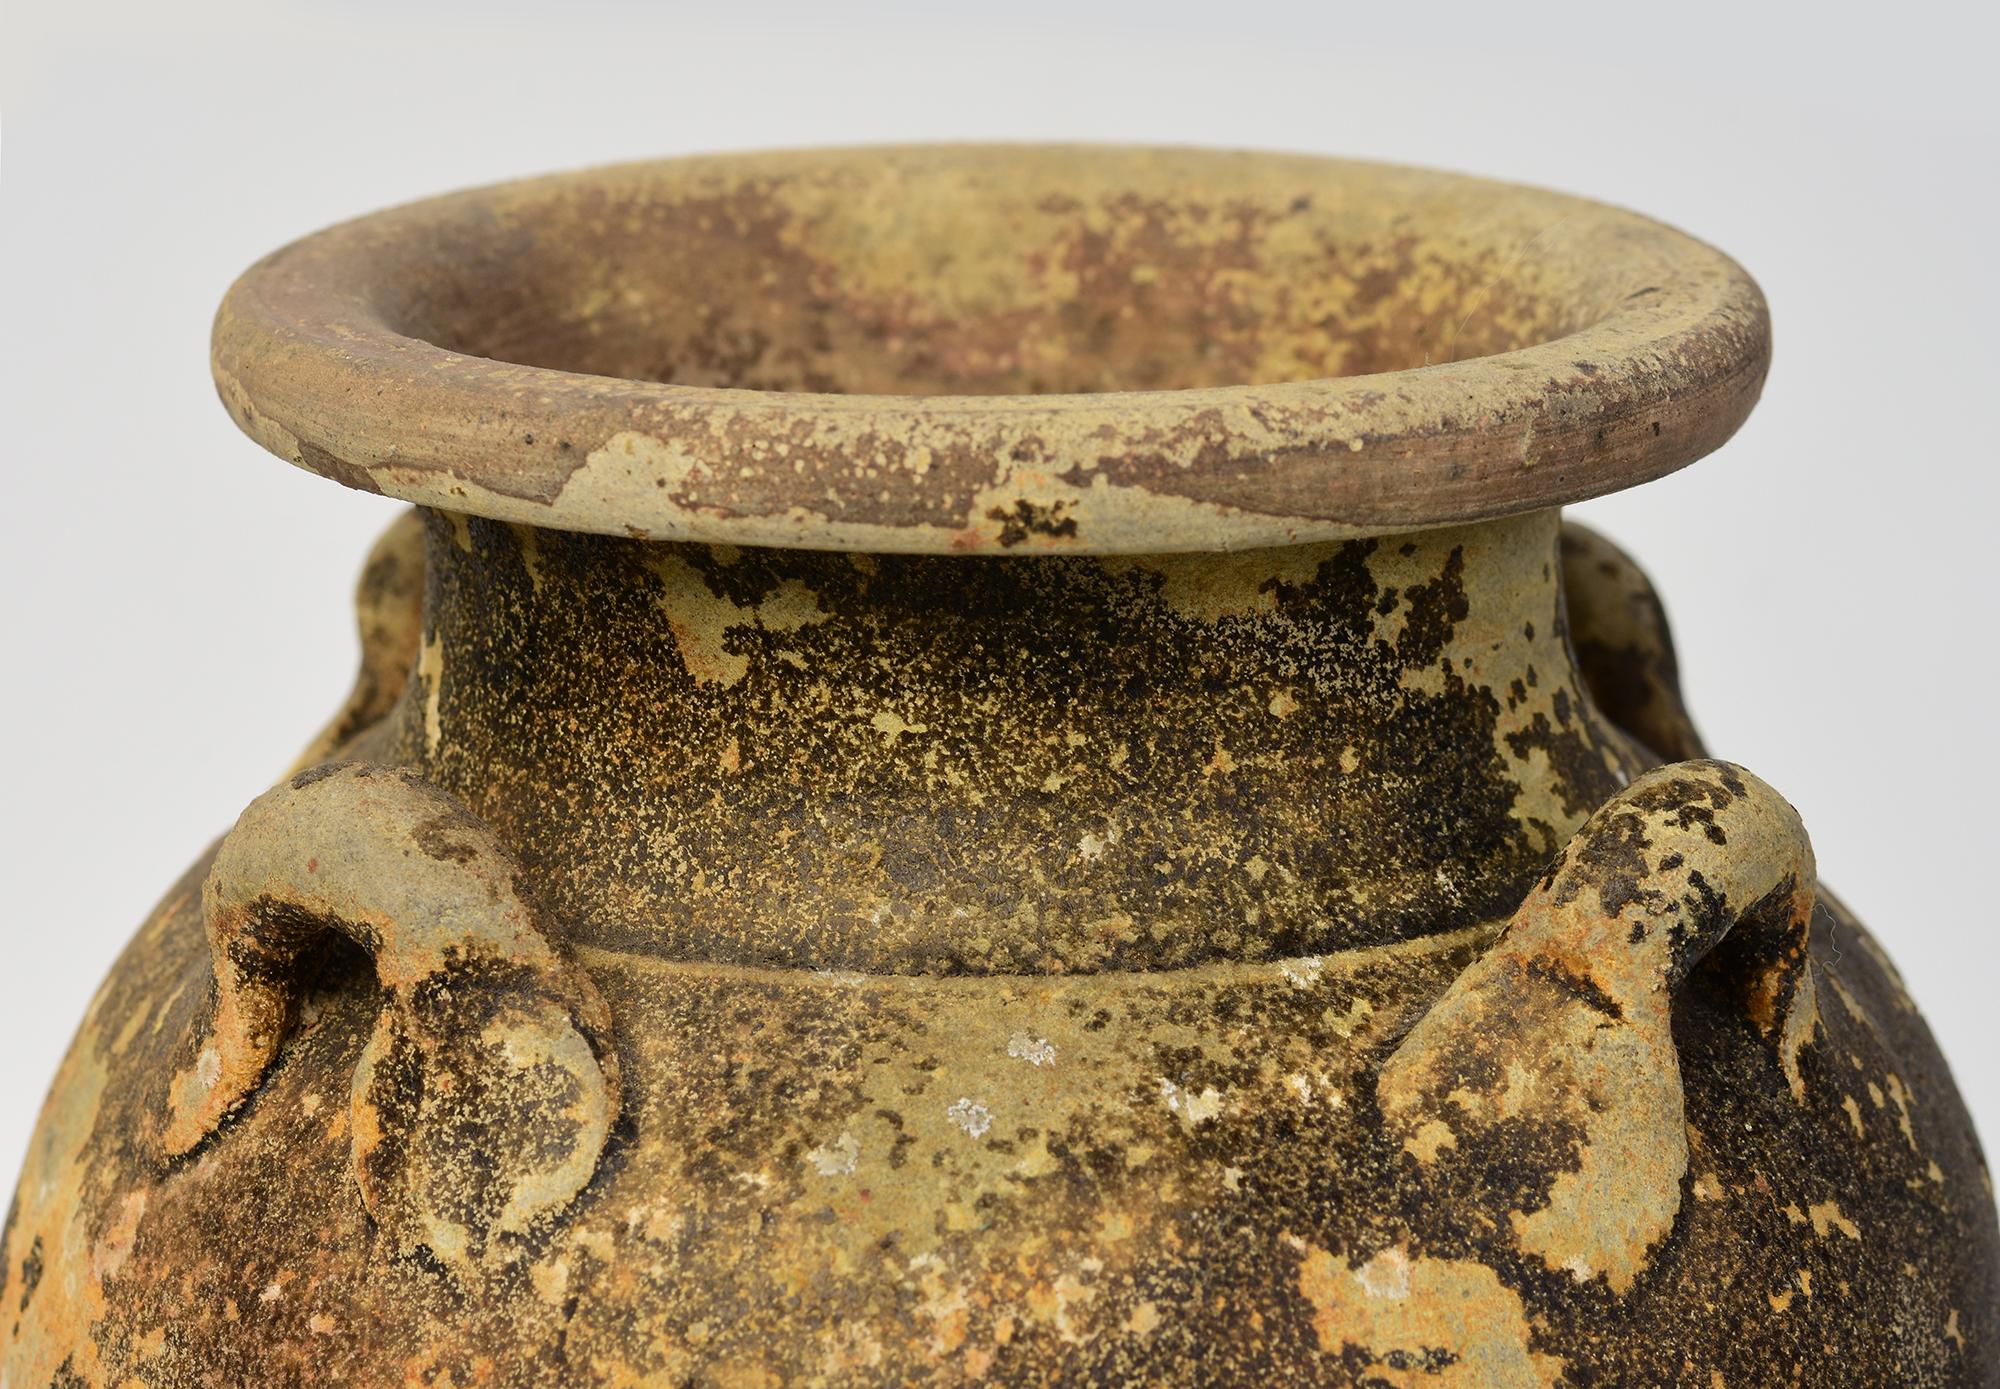 Antique Thai Sukhothai pottery jar.

Age: Thailand, Sukhothai Period, 14th - 16th Century
Size: Height 29.7 C.M. / Width 17.3 C.M.
Condition: Nice condition overall (some expected degradation due to its age).

100% Satisfaction and authenticity